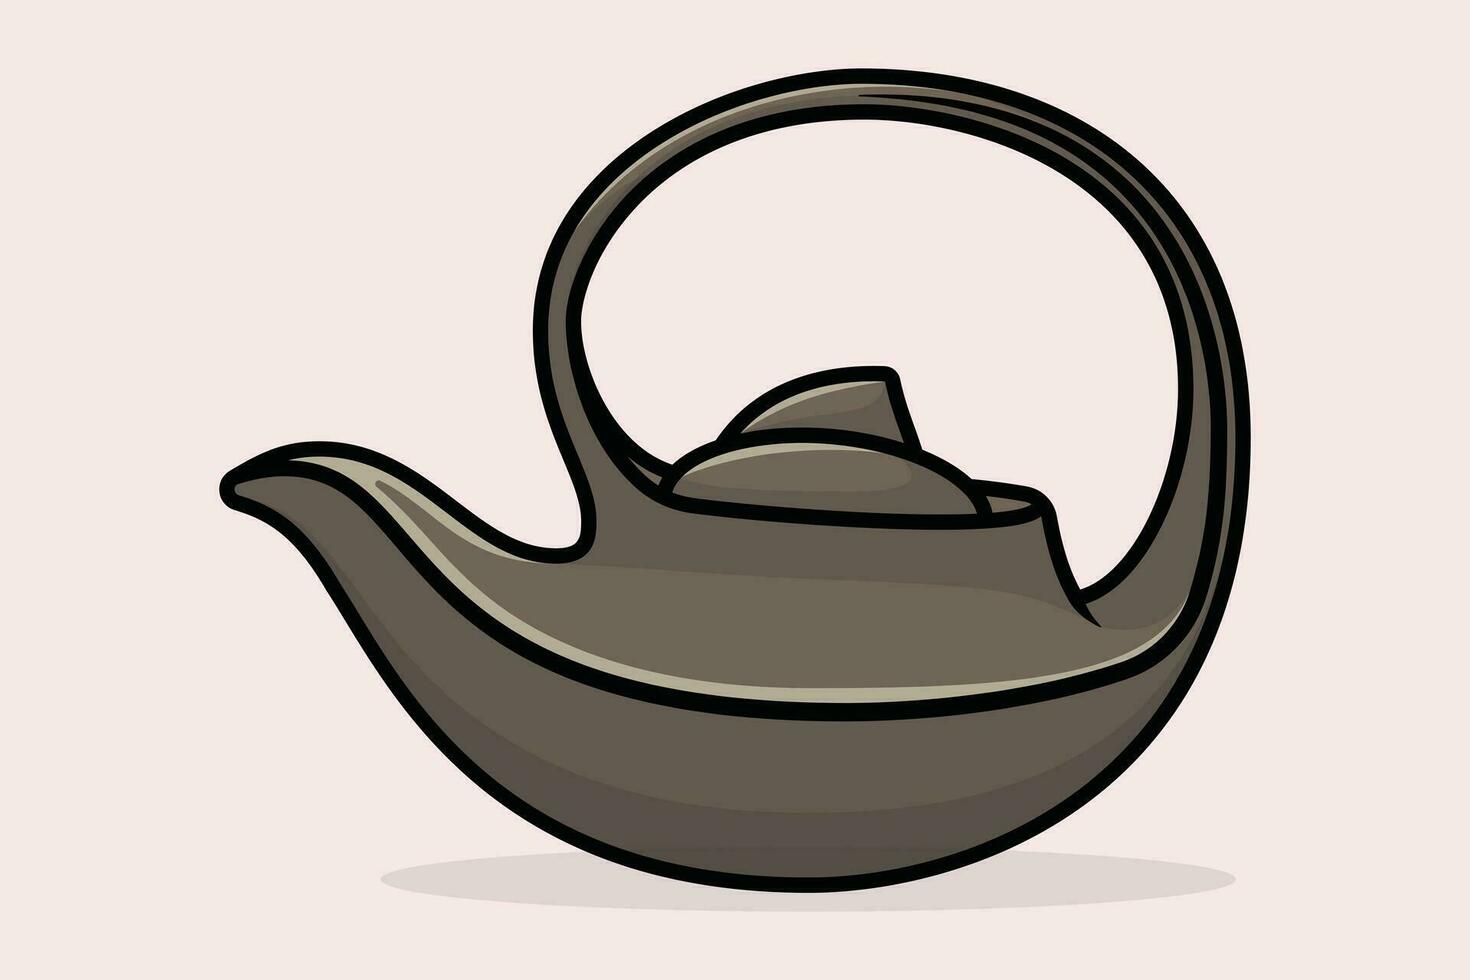 House Unique Tea Kettle vector illustration. Kitchen interior object icon concept. Kitchen Teapot with closed lid icon design with shadow. Clay teakettle vector design icon.